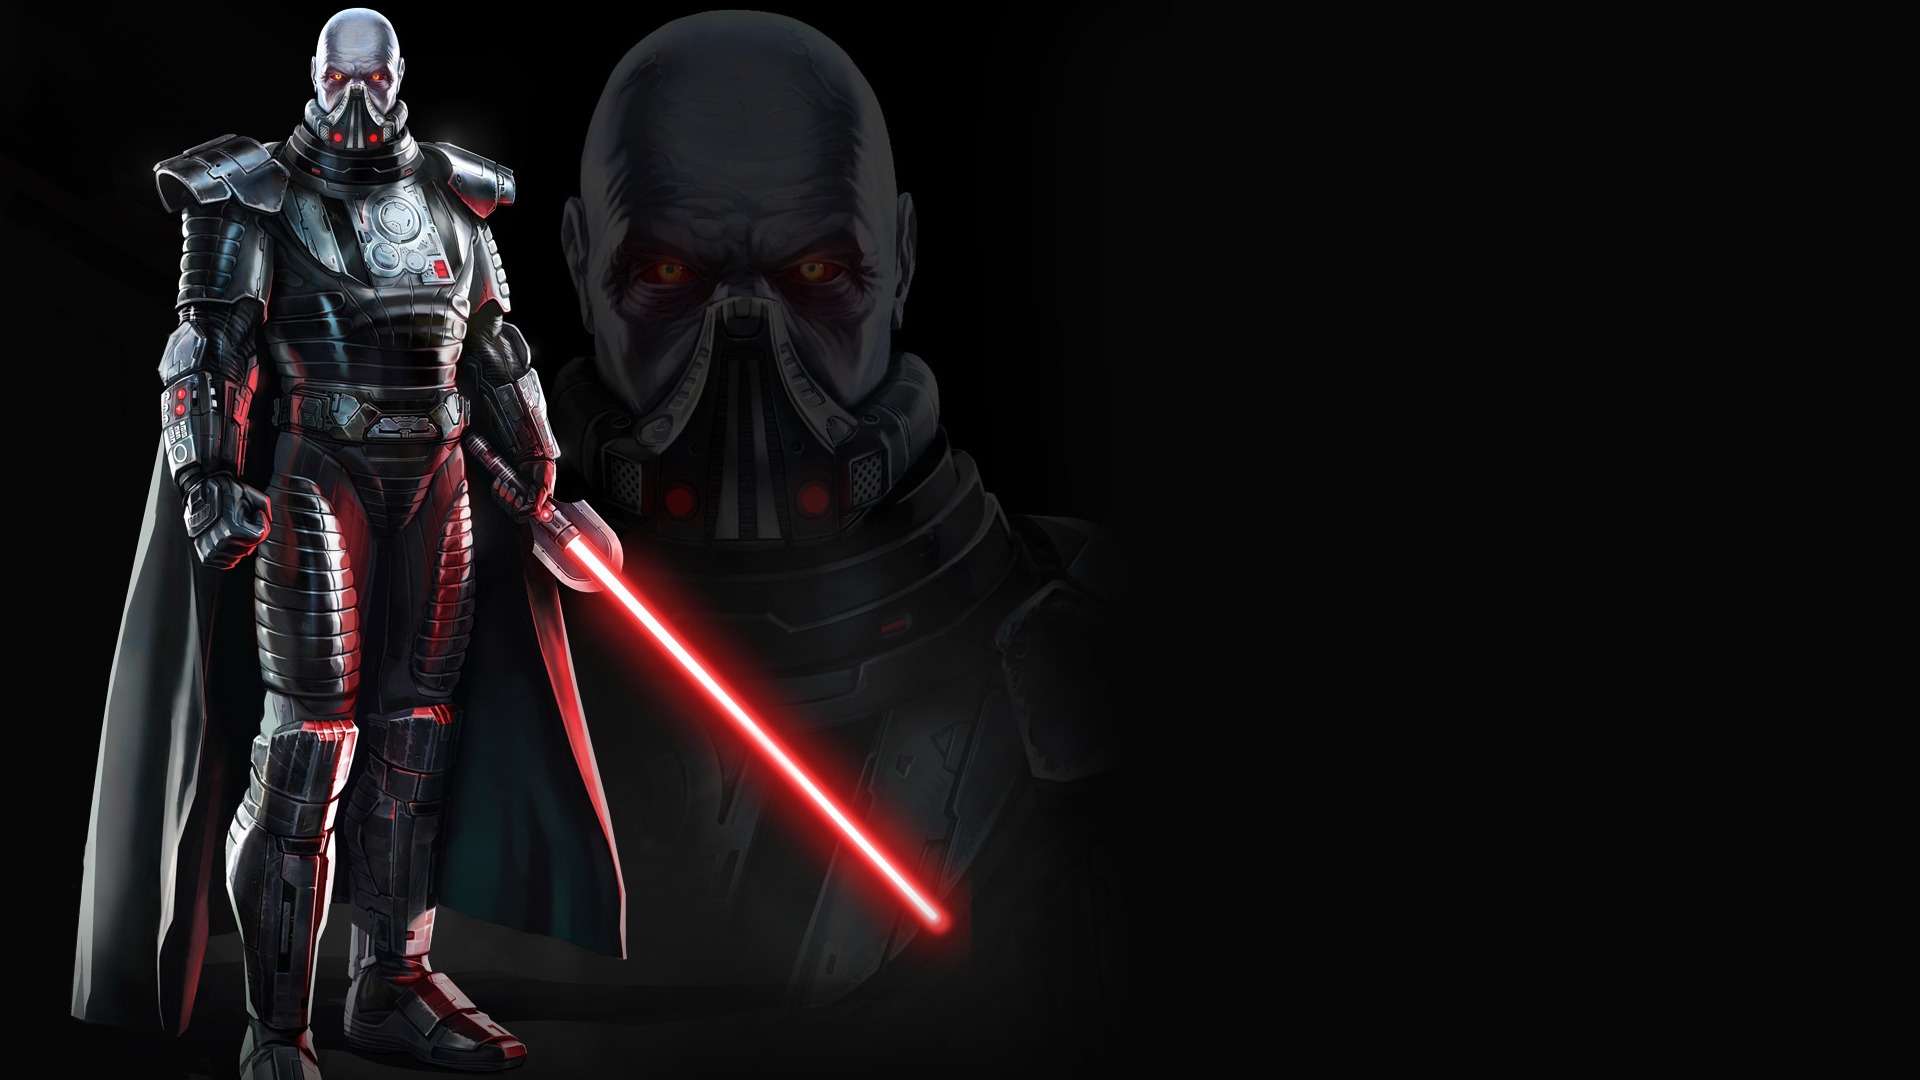 Star Wars, Sith, Star Wars: The Old Republic, Lightsaber, Video Games Wallpaper